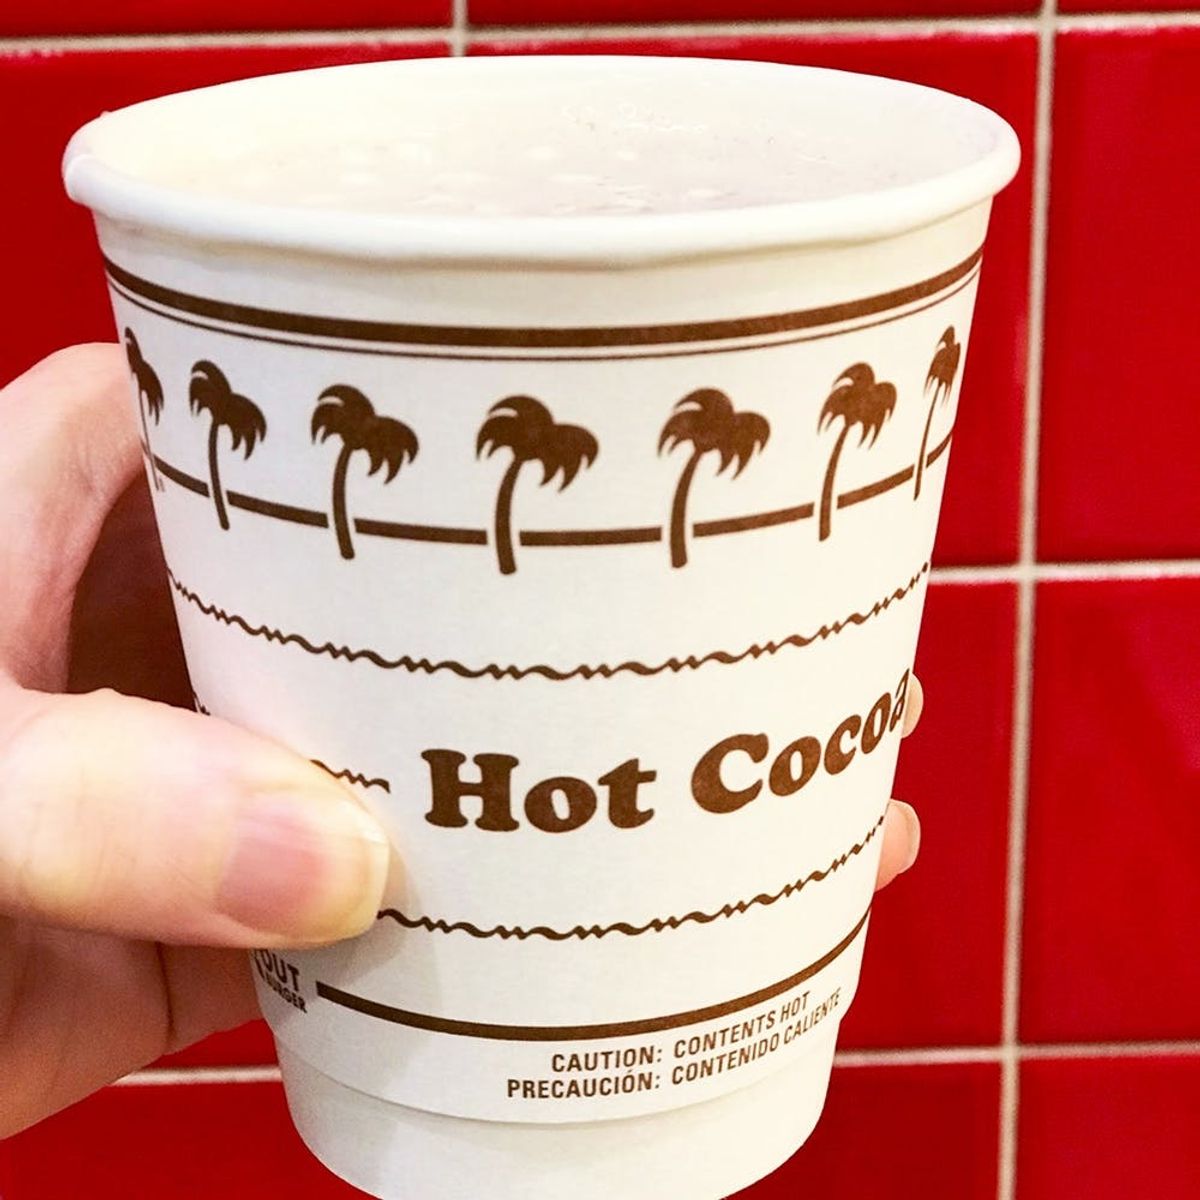 I Tried In-N-Out’s New Hot Cocoa and Yep, You’re Going to Want It